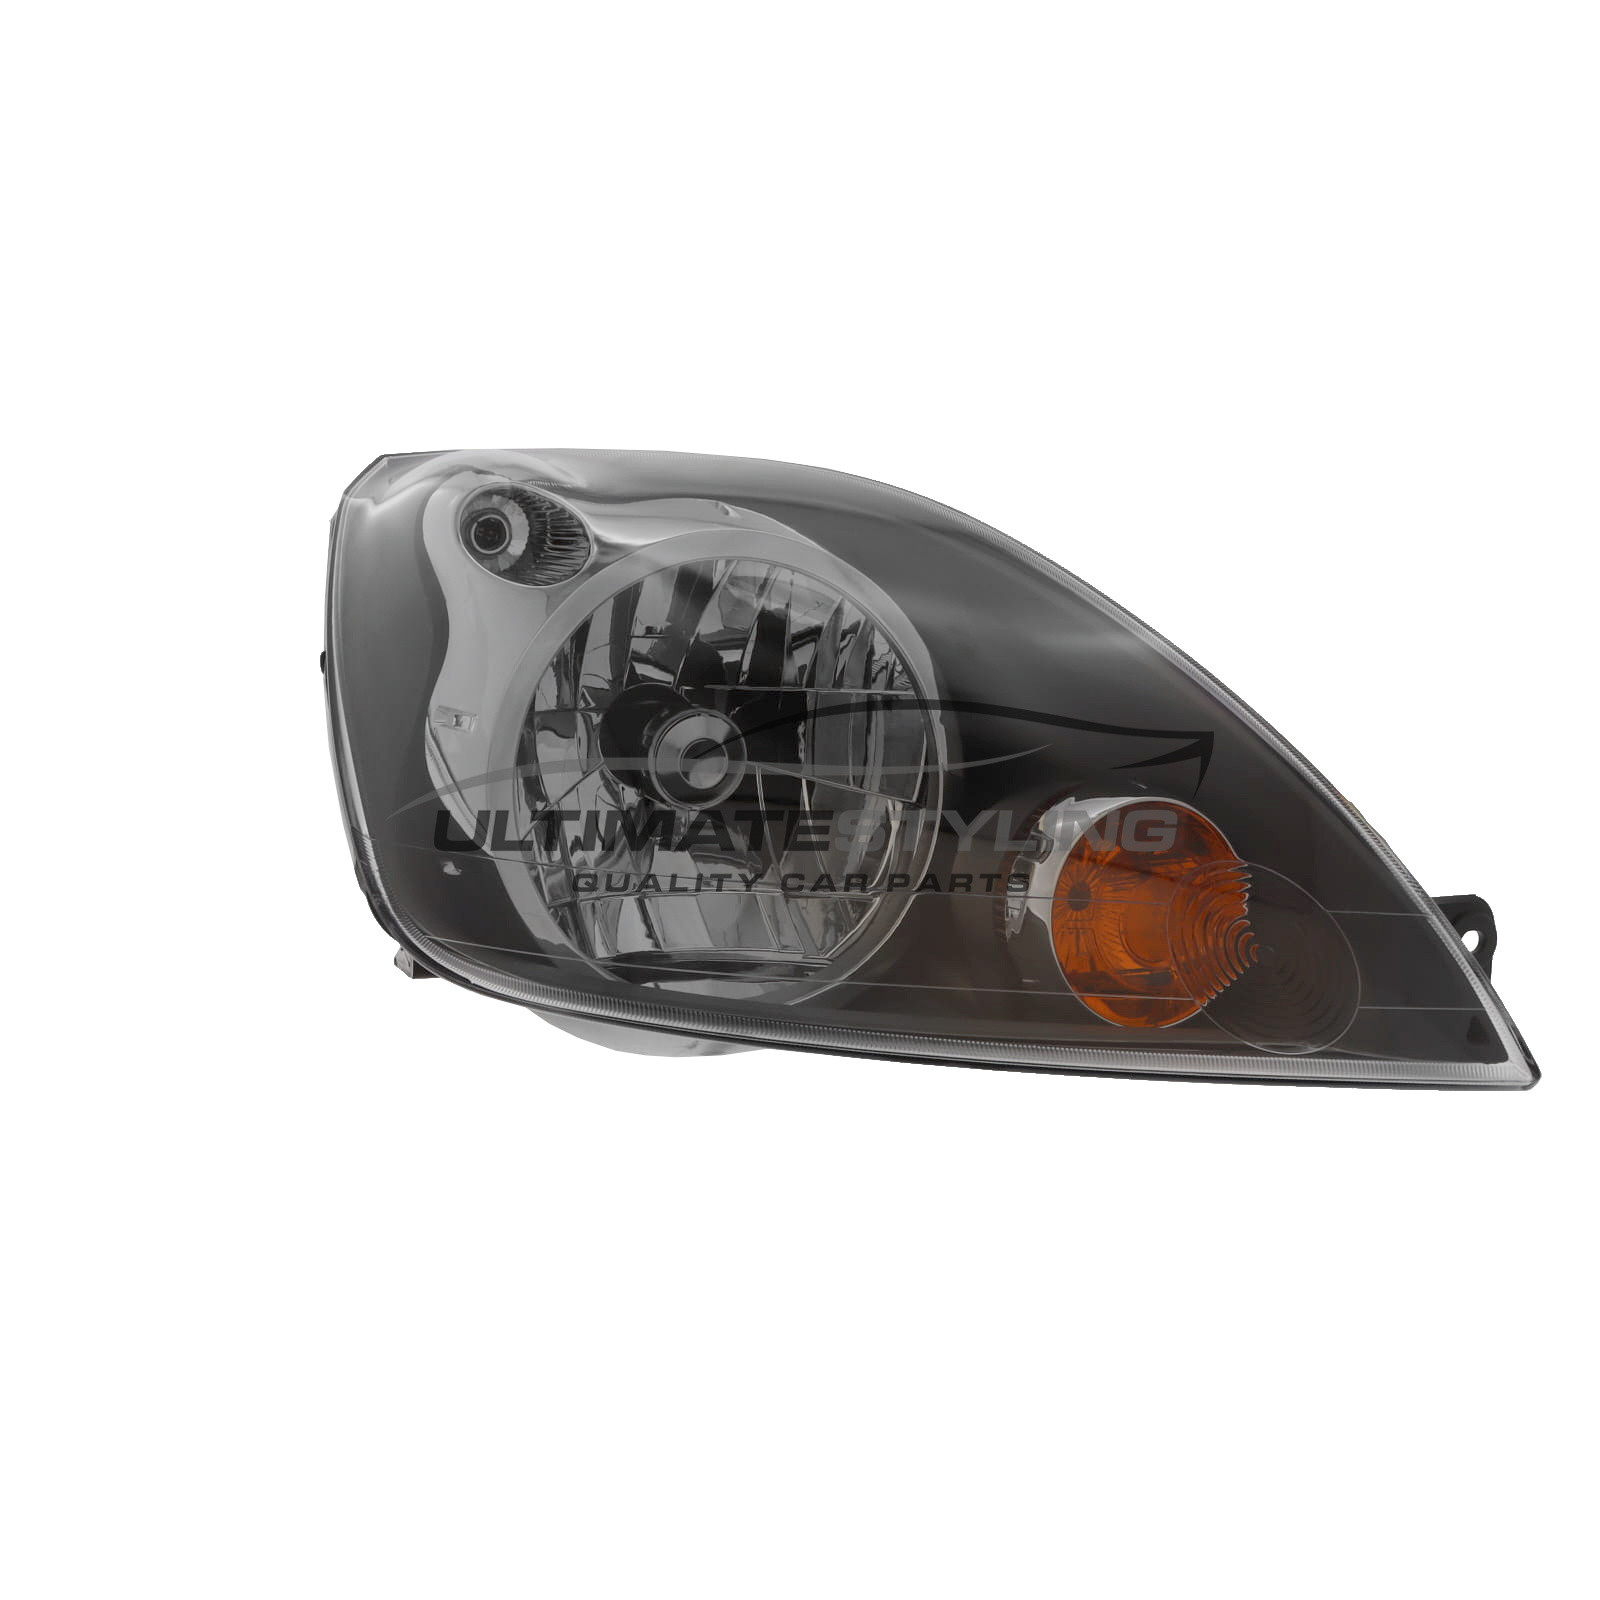 Ford Fiesta 2005-2009 Halogen, Electric With Motor, Grey Inner Headlight / Headlamp Including Amber Indicator Drivers Side (RH)